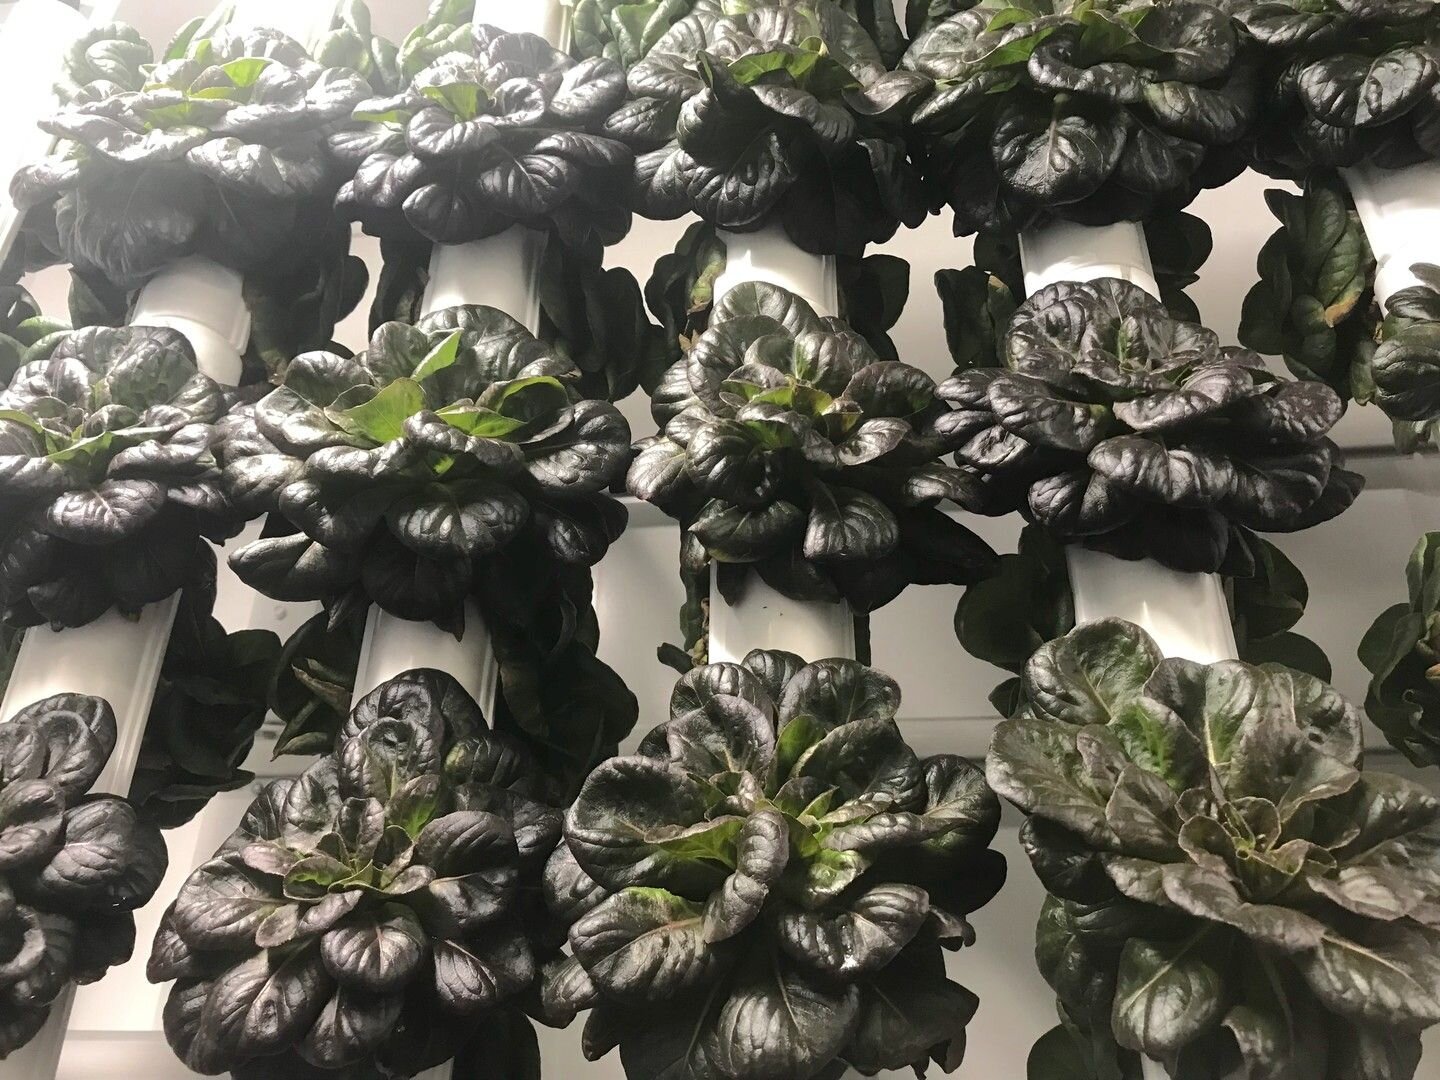 Hyper-local, nutrient-dense, red butterhead lettuce will soon be available to you! 💚 @farmboxfoods shares how you can have fresh greens year round with #hydroponics

Click the link in bio or visit our @networkforgood page to donate: https://beverlyh